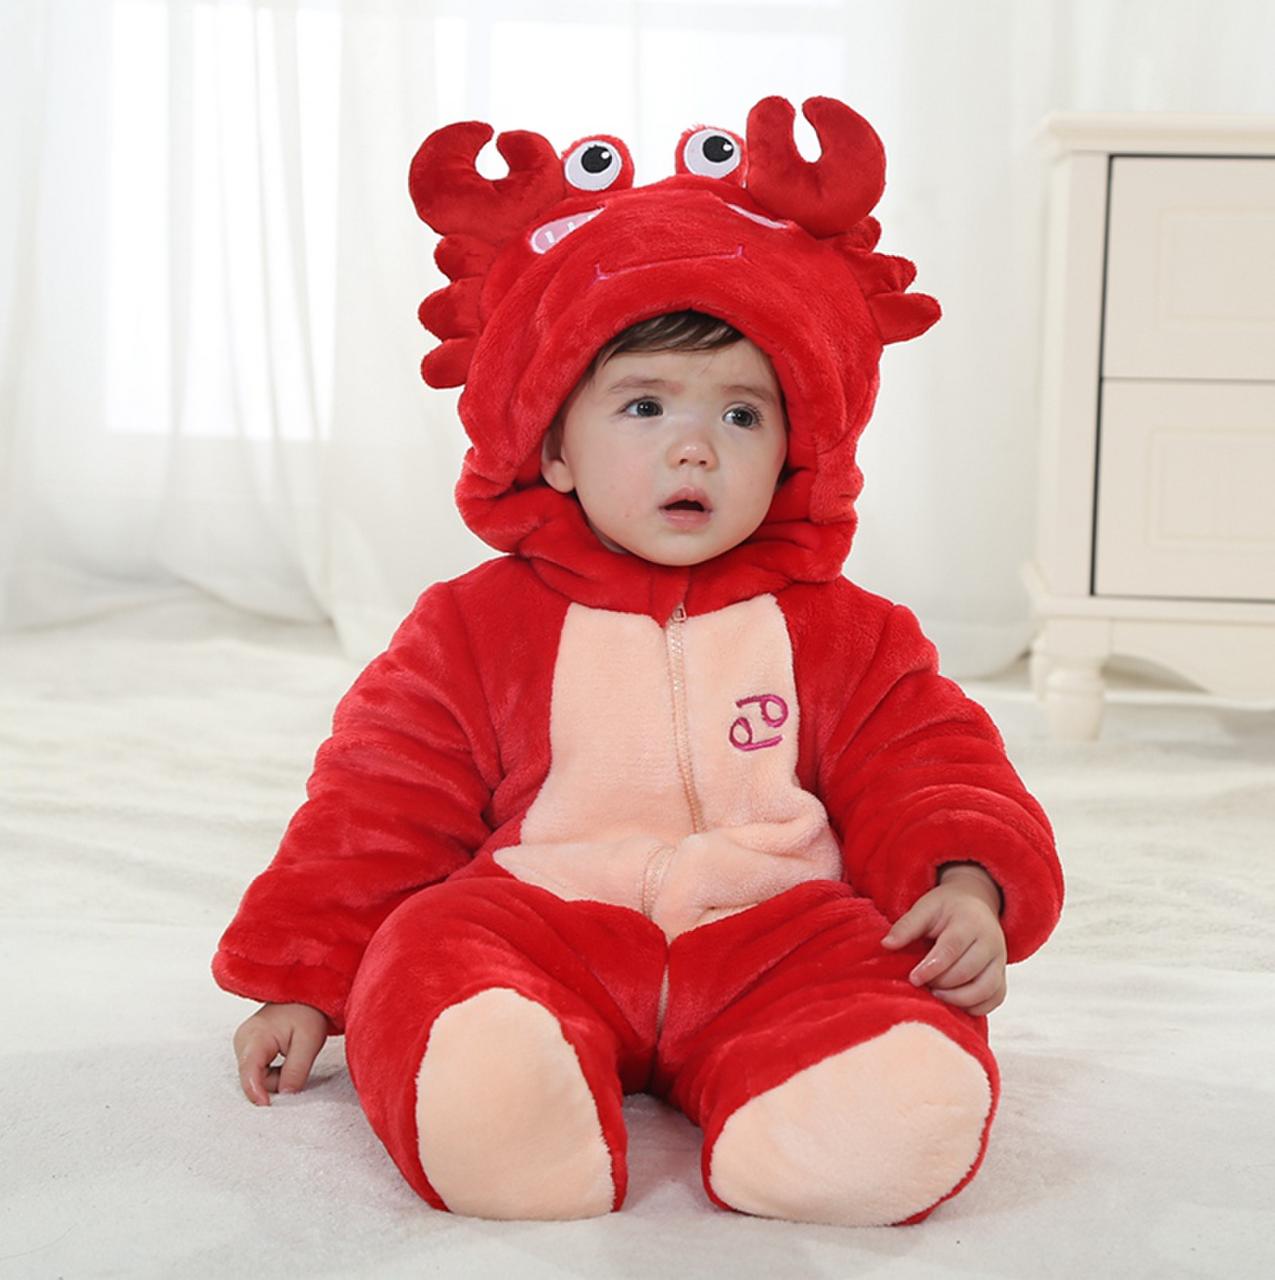 Cancer children clothing Winter Type Unisex Playsuits Romper Toddlers jumpsuit cute baby outfits for newborn, Baby Boy or Girl, baby animal onesie,1st Birthday,Baby Clothes ,baby winter onesie,Babywear,Christmas Baby,cute baby onesie,1st Birthday Owl Bodysuit,Funny Baby Clothes